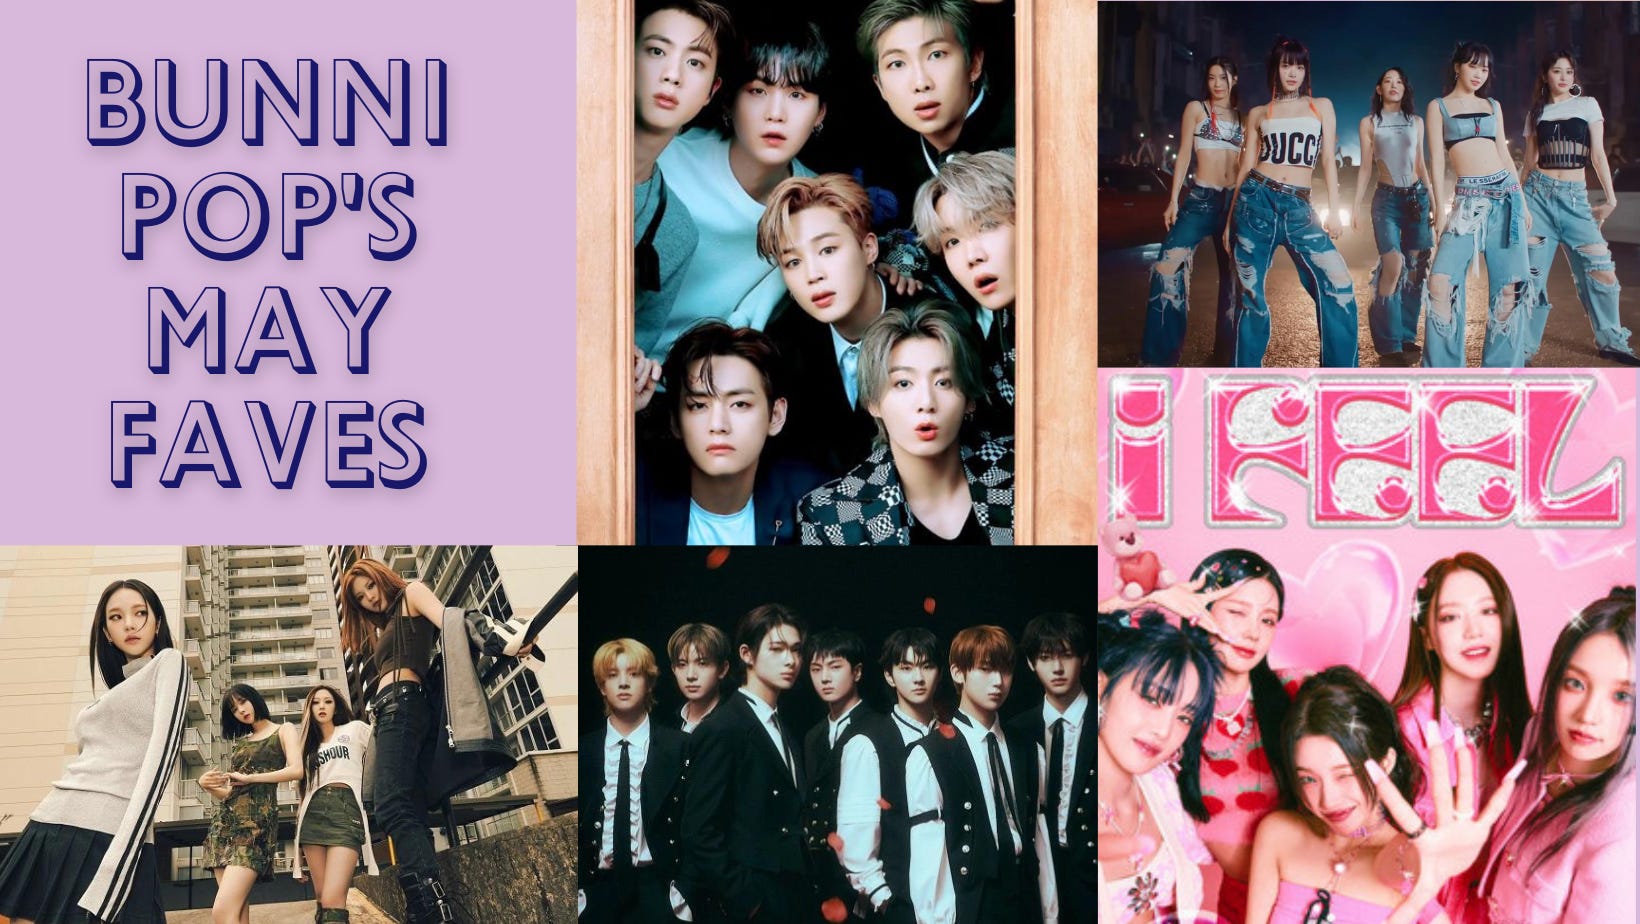 Bands Like BTS: Seventeen, TOMORROW X TOGETHER, ENHYPEN, NCT 127